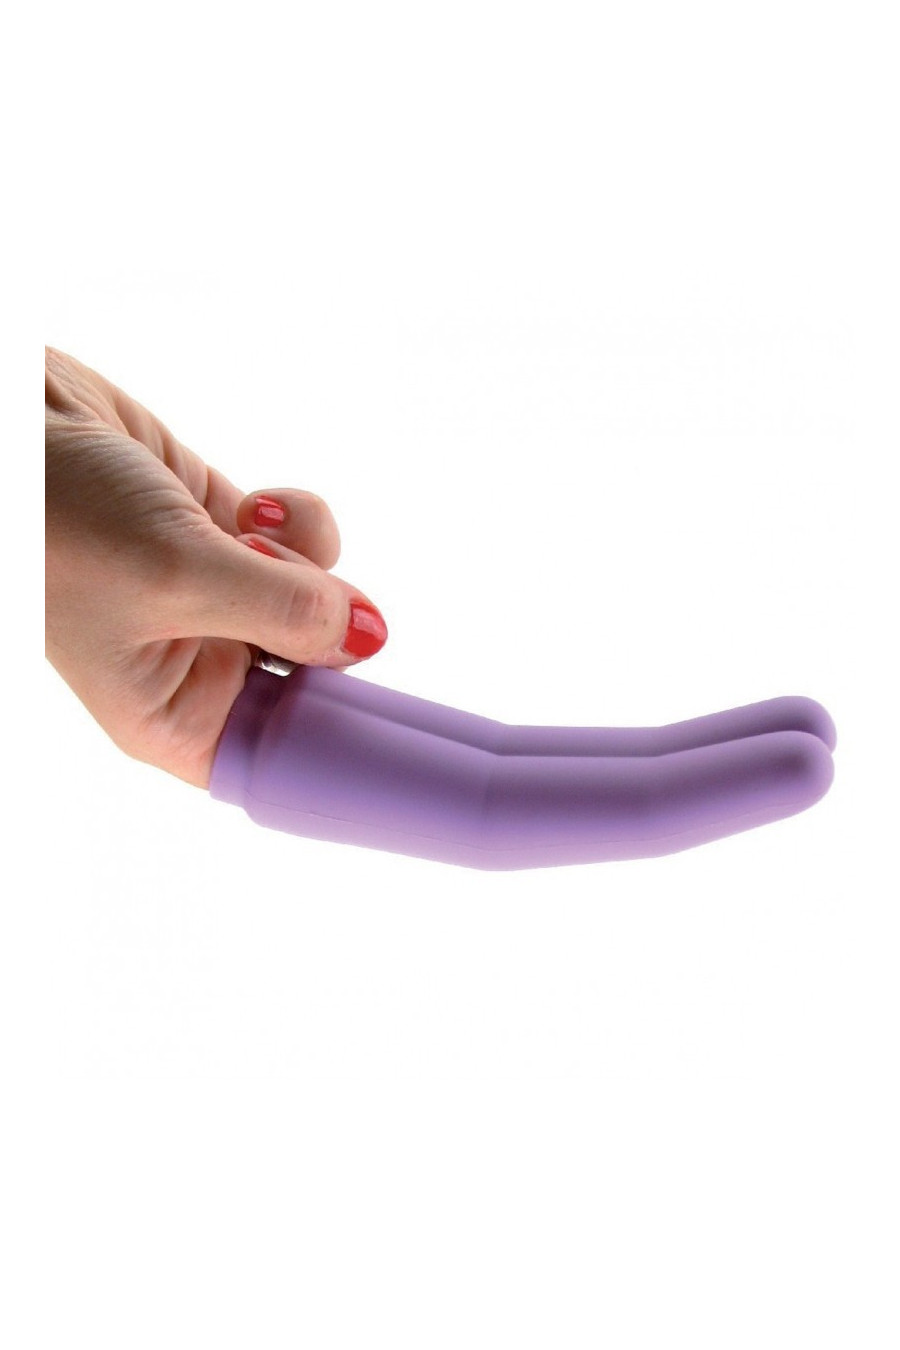 WET FOR HER TOY TWO SEX TOY PURPLE